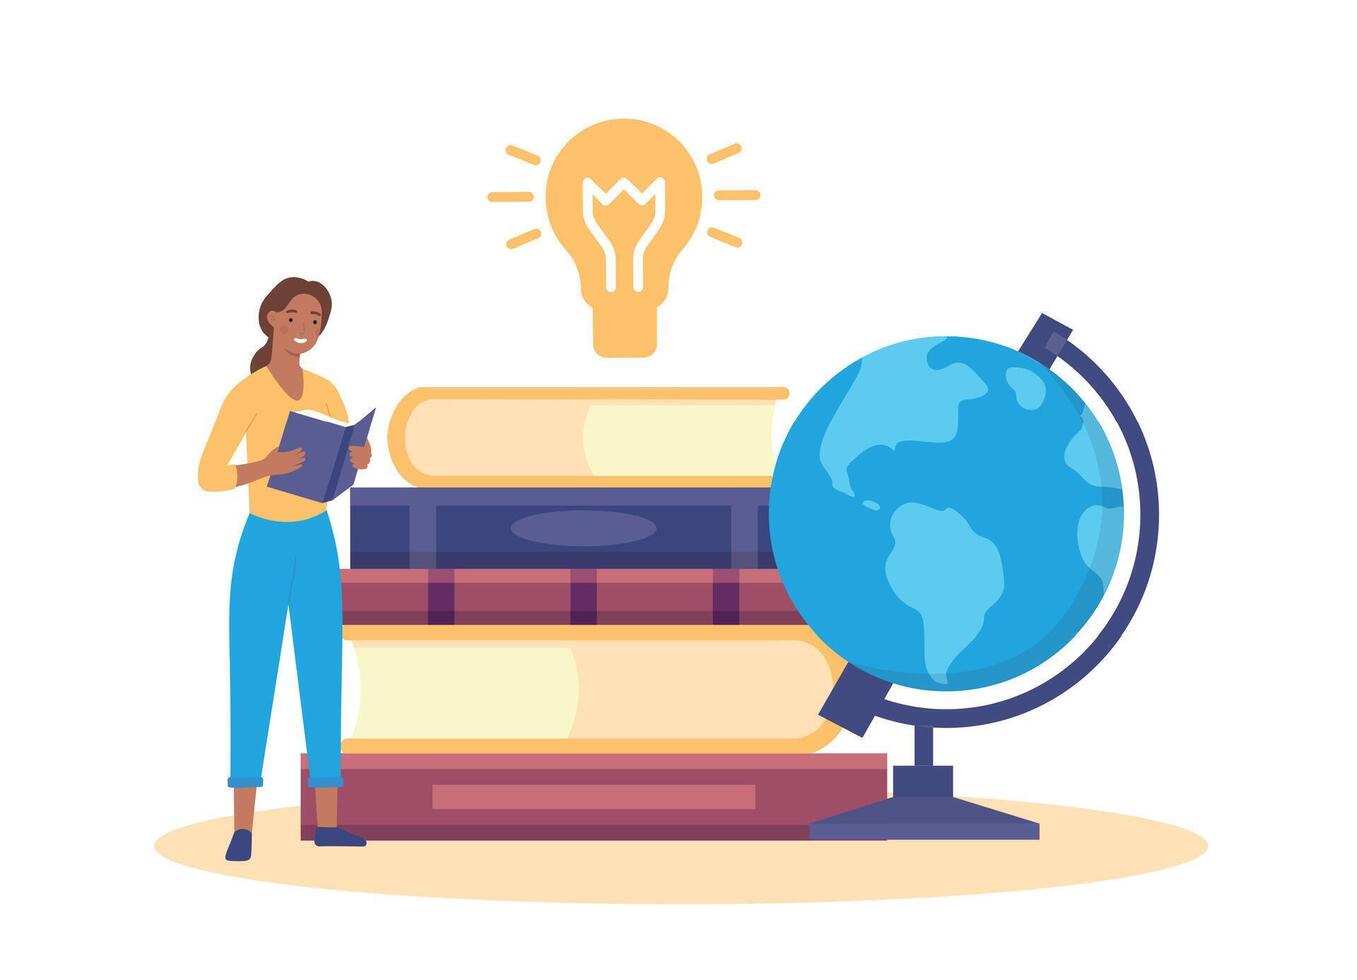 Education concept. Woman reading book. Female character standing near stack of textbooks and globe, studying vector